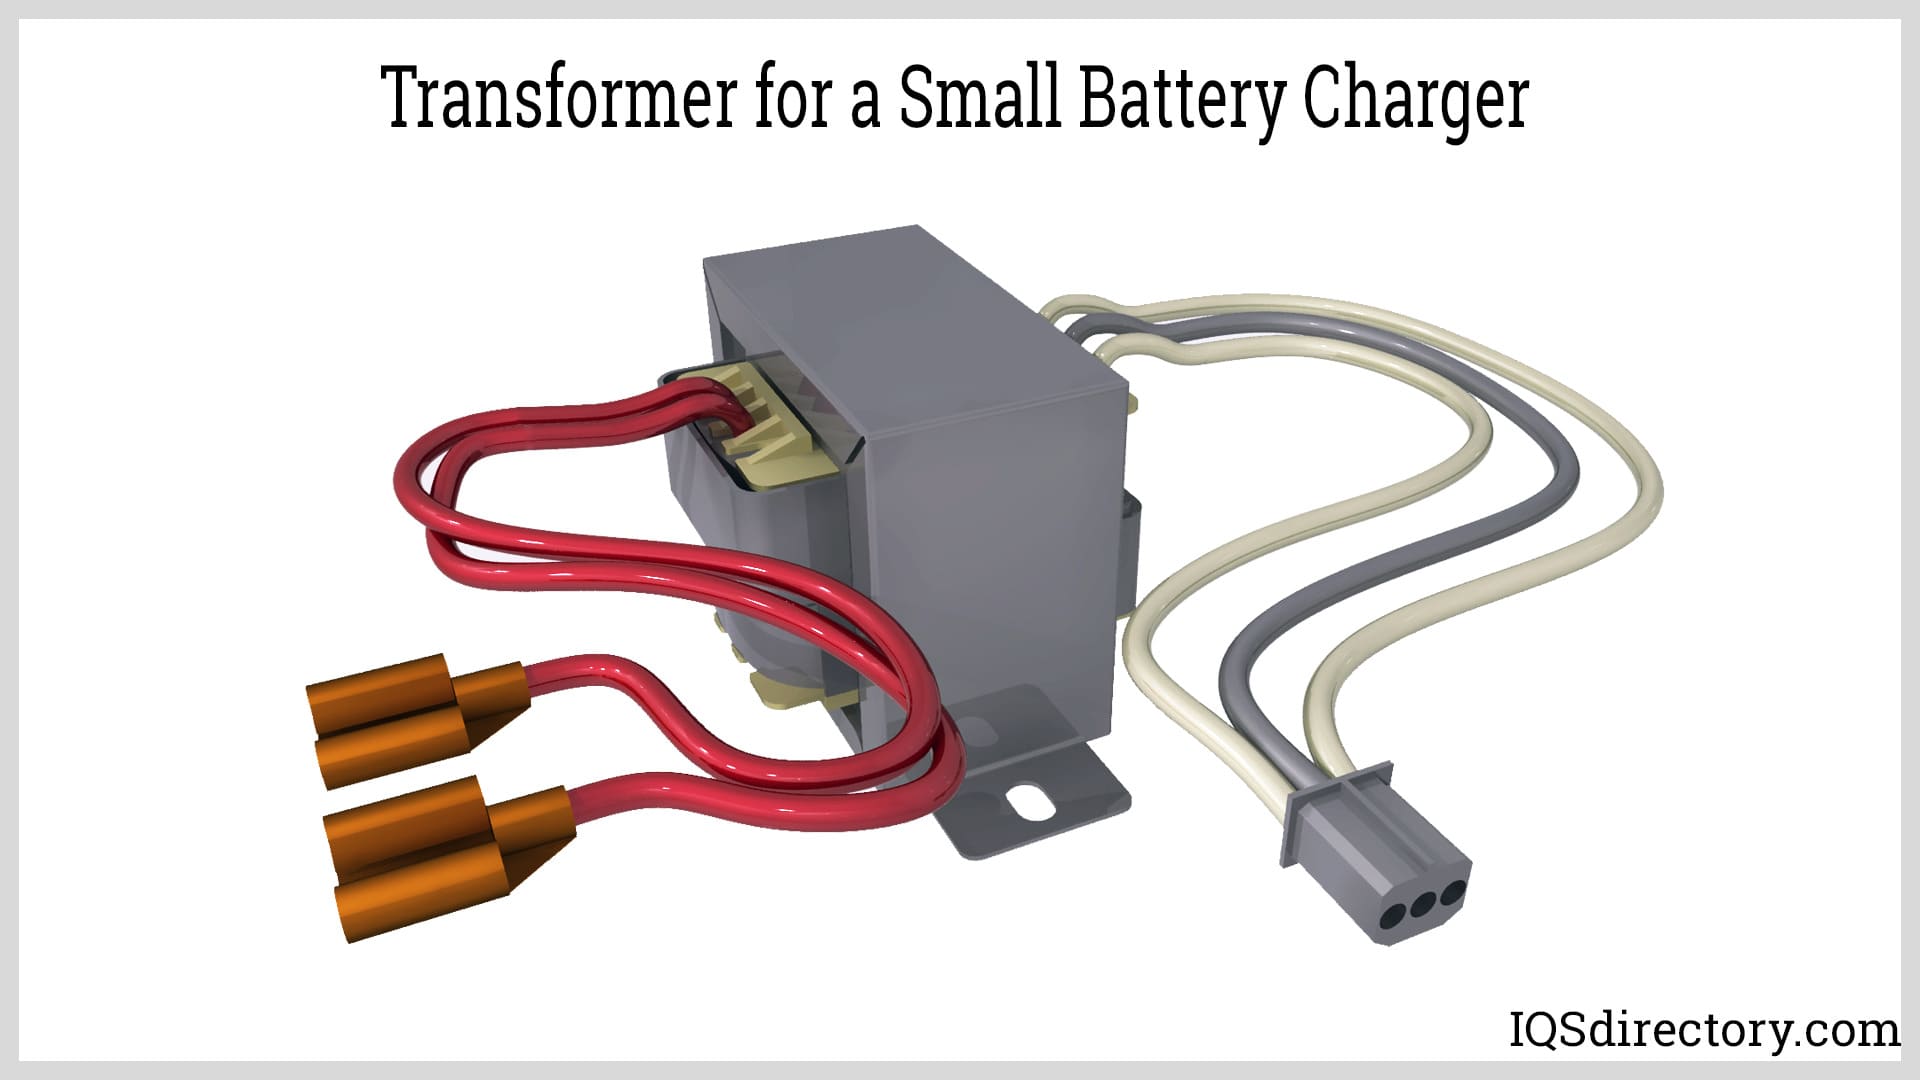 Transformer for a Small Battery Charger